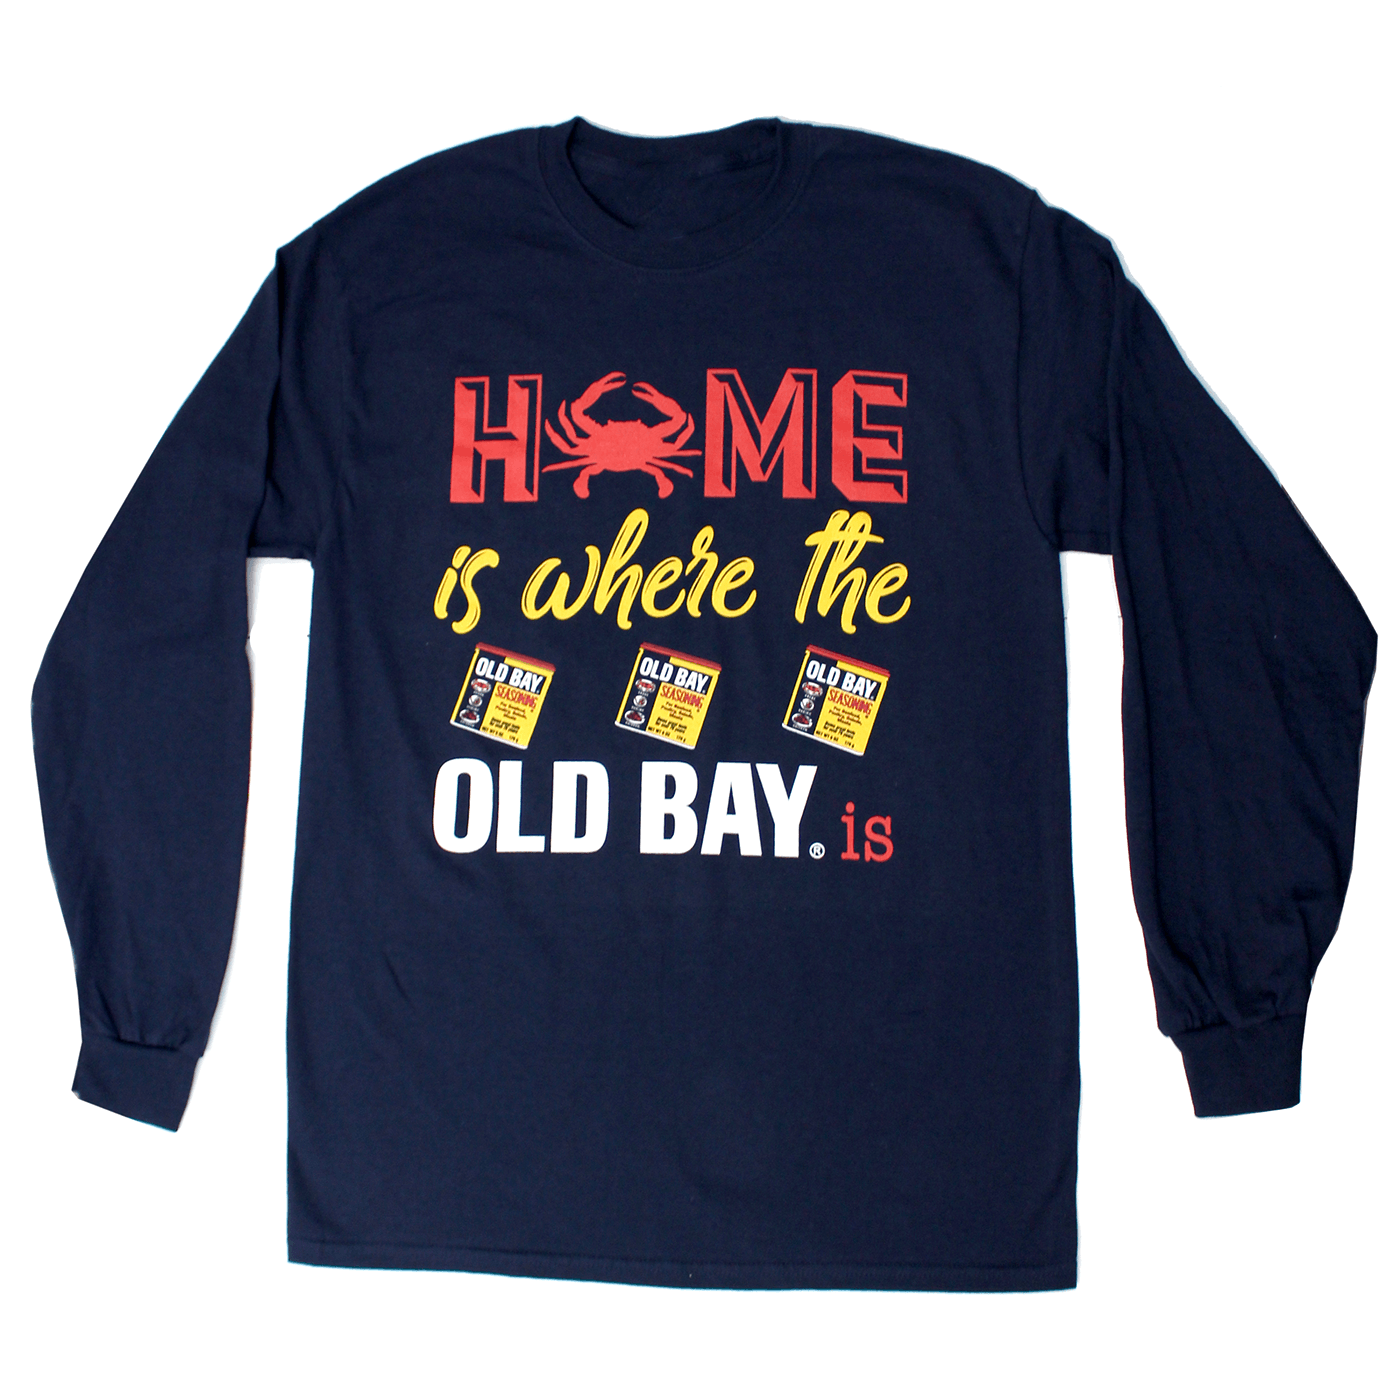 Home Is Where The Old Bay Is (Navy) / Long Sleeve Shirt - Route One Apparel